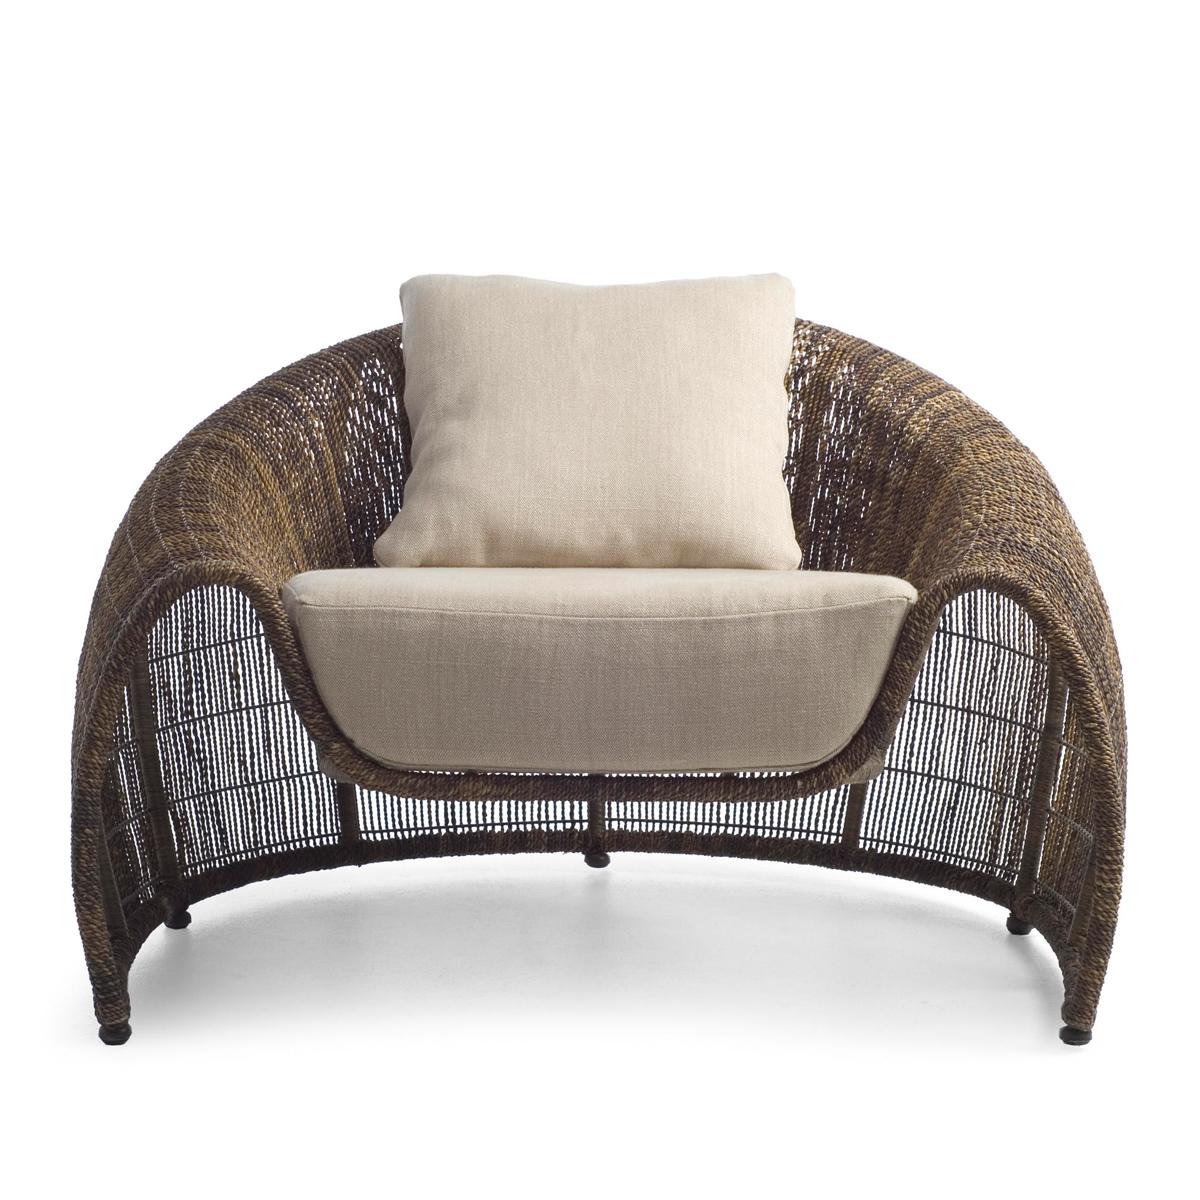 Armchair half-moon Indoor or outdoor with
structure in steel and natural abaca from Borneo.
With cushion seat and back included. Colors
finish in linen cream (indoor), or grey or light grey
(outdoor). Lead time production if on stock
2-3 weeks, if